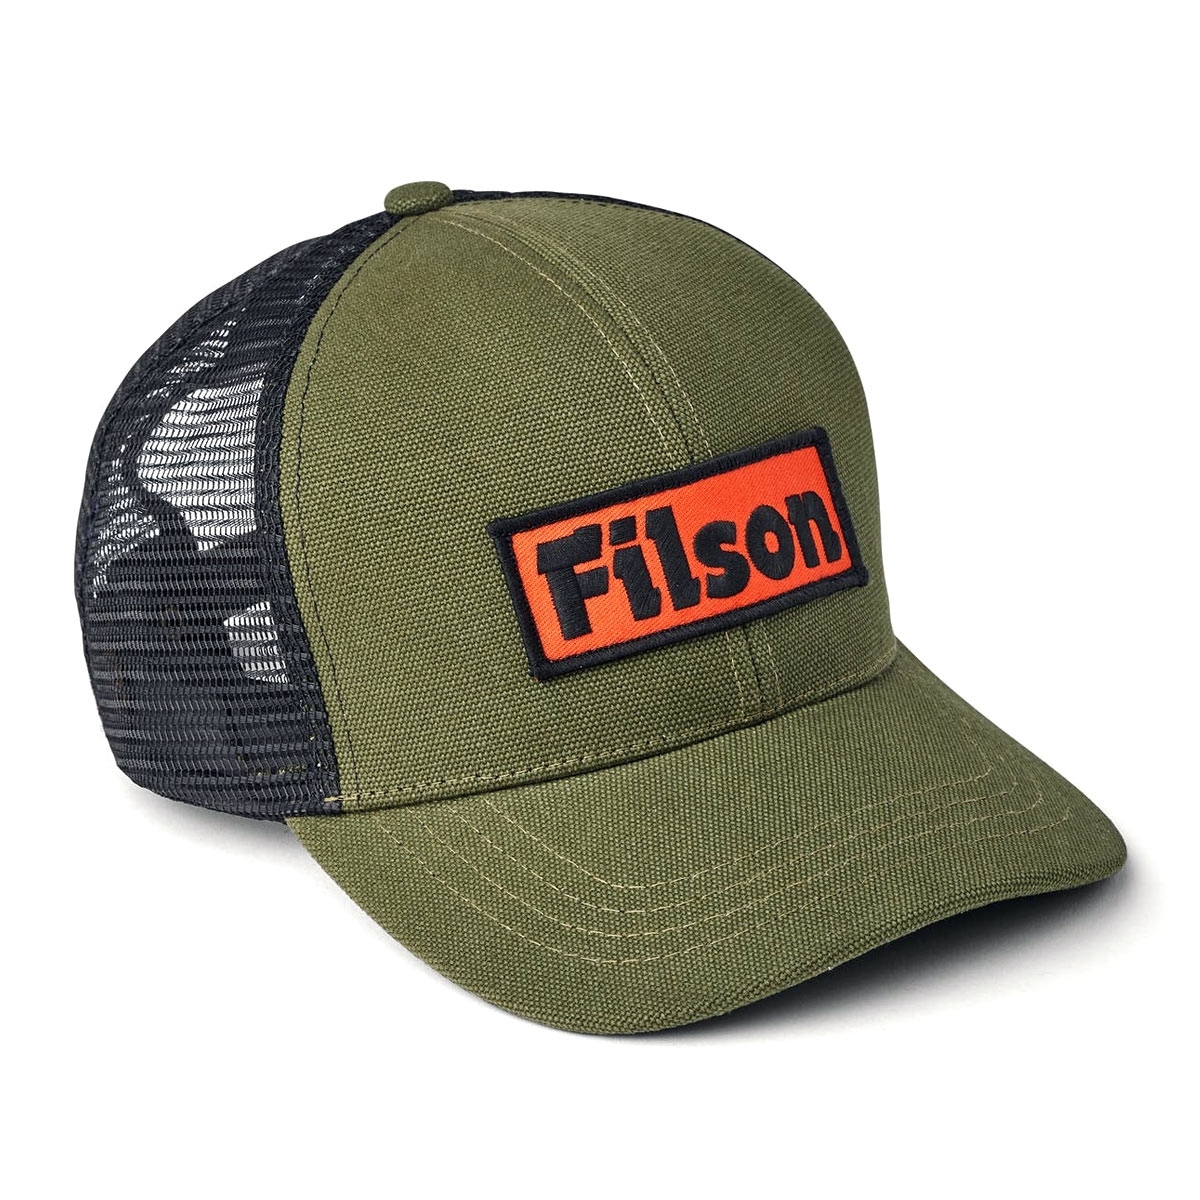 Filson Mesh Logger Cap Black, A water-repellent cap with mesh back for ...